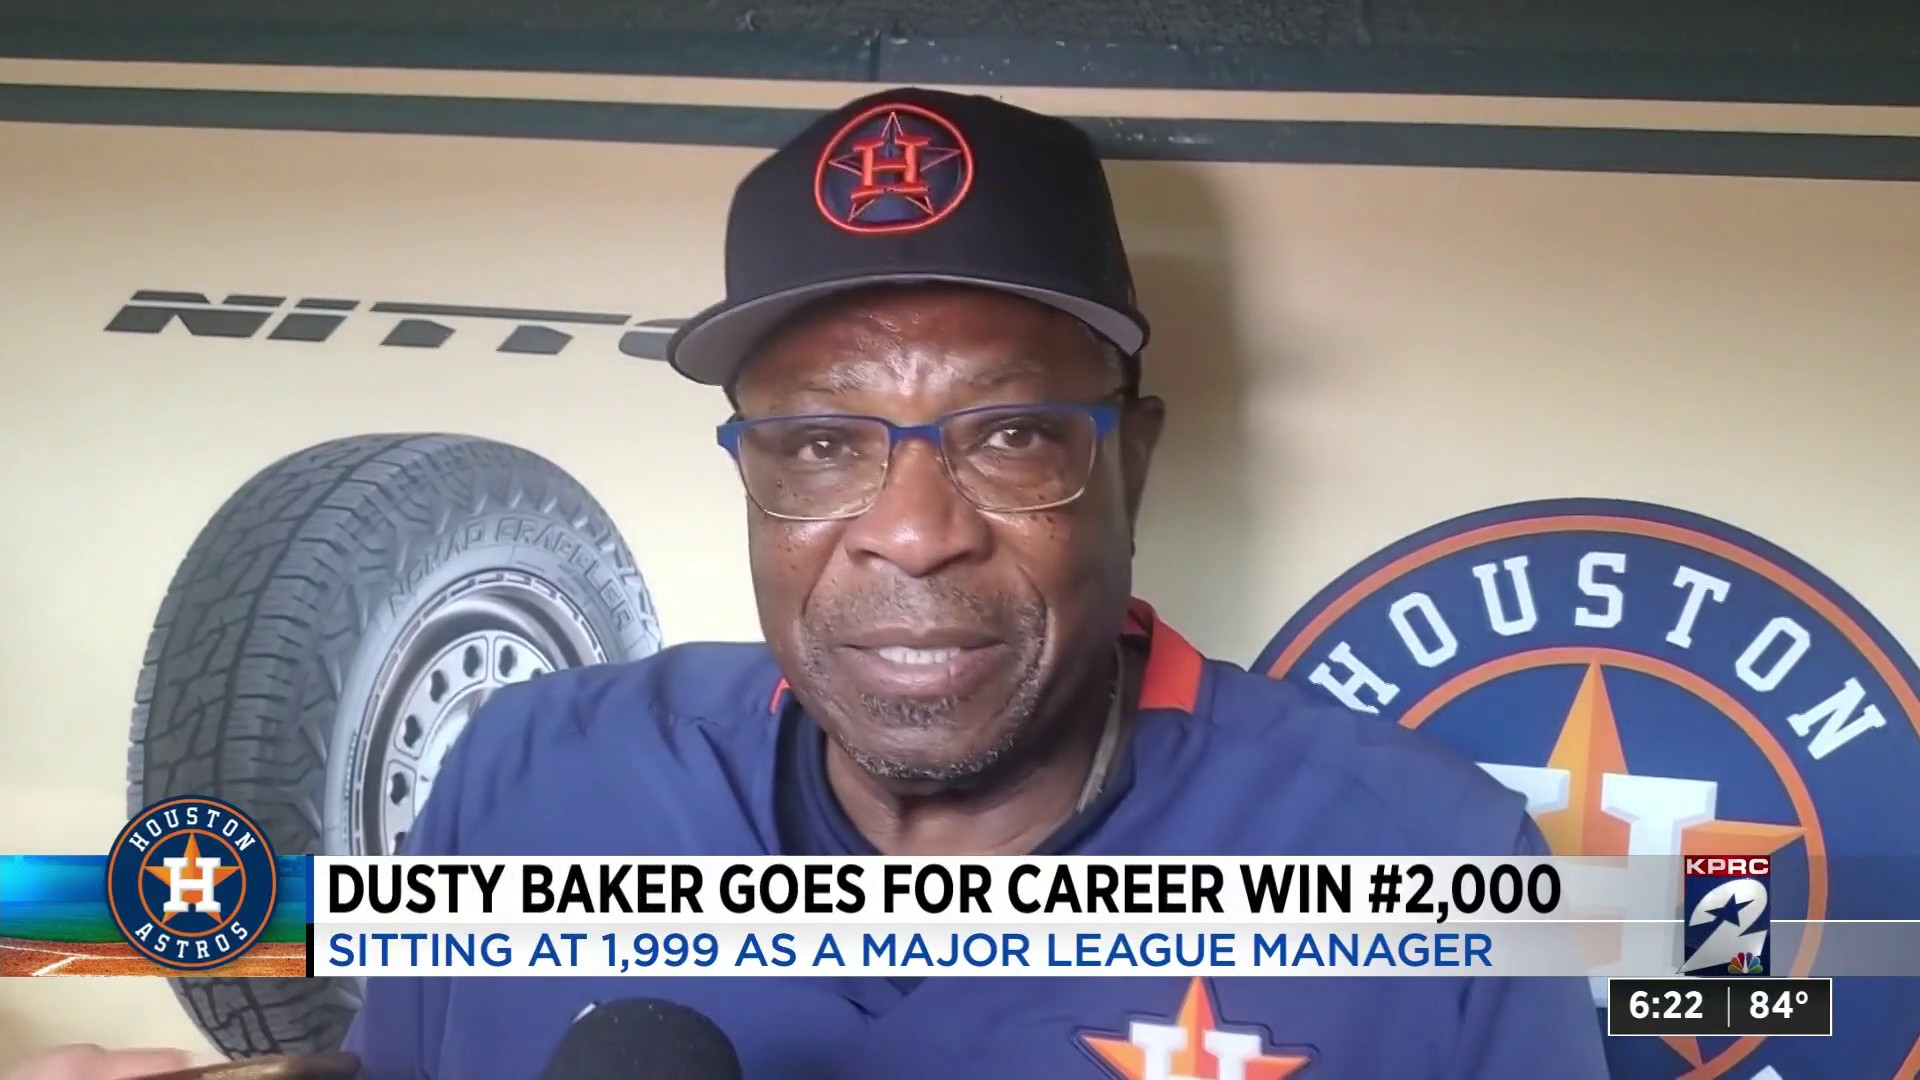 On the cusp of history: The significance of Dusty Baker reaching